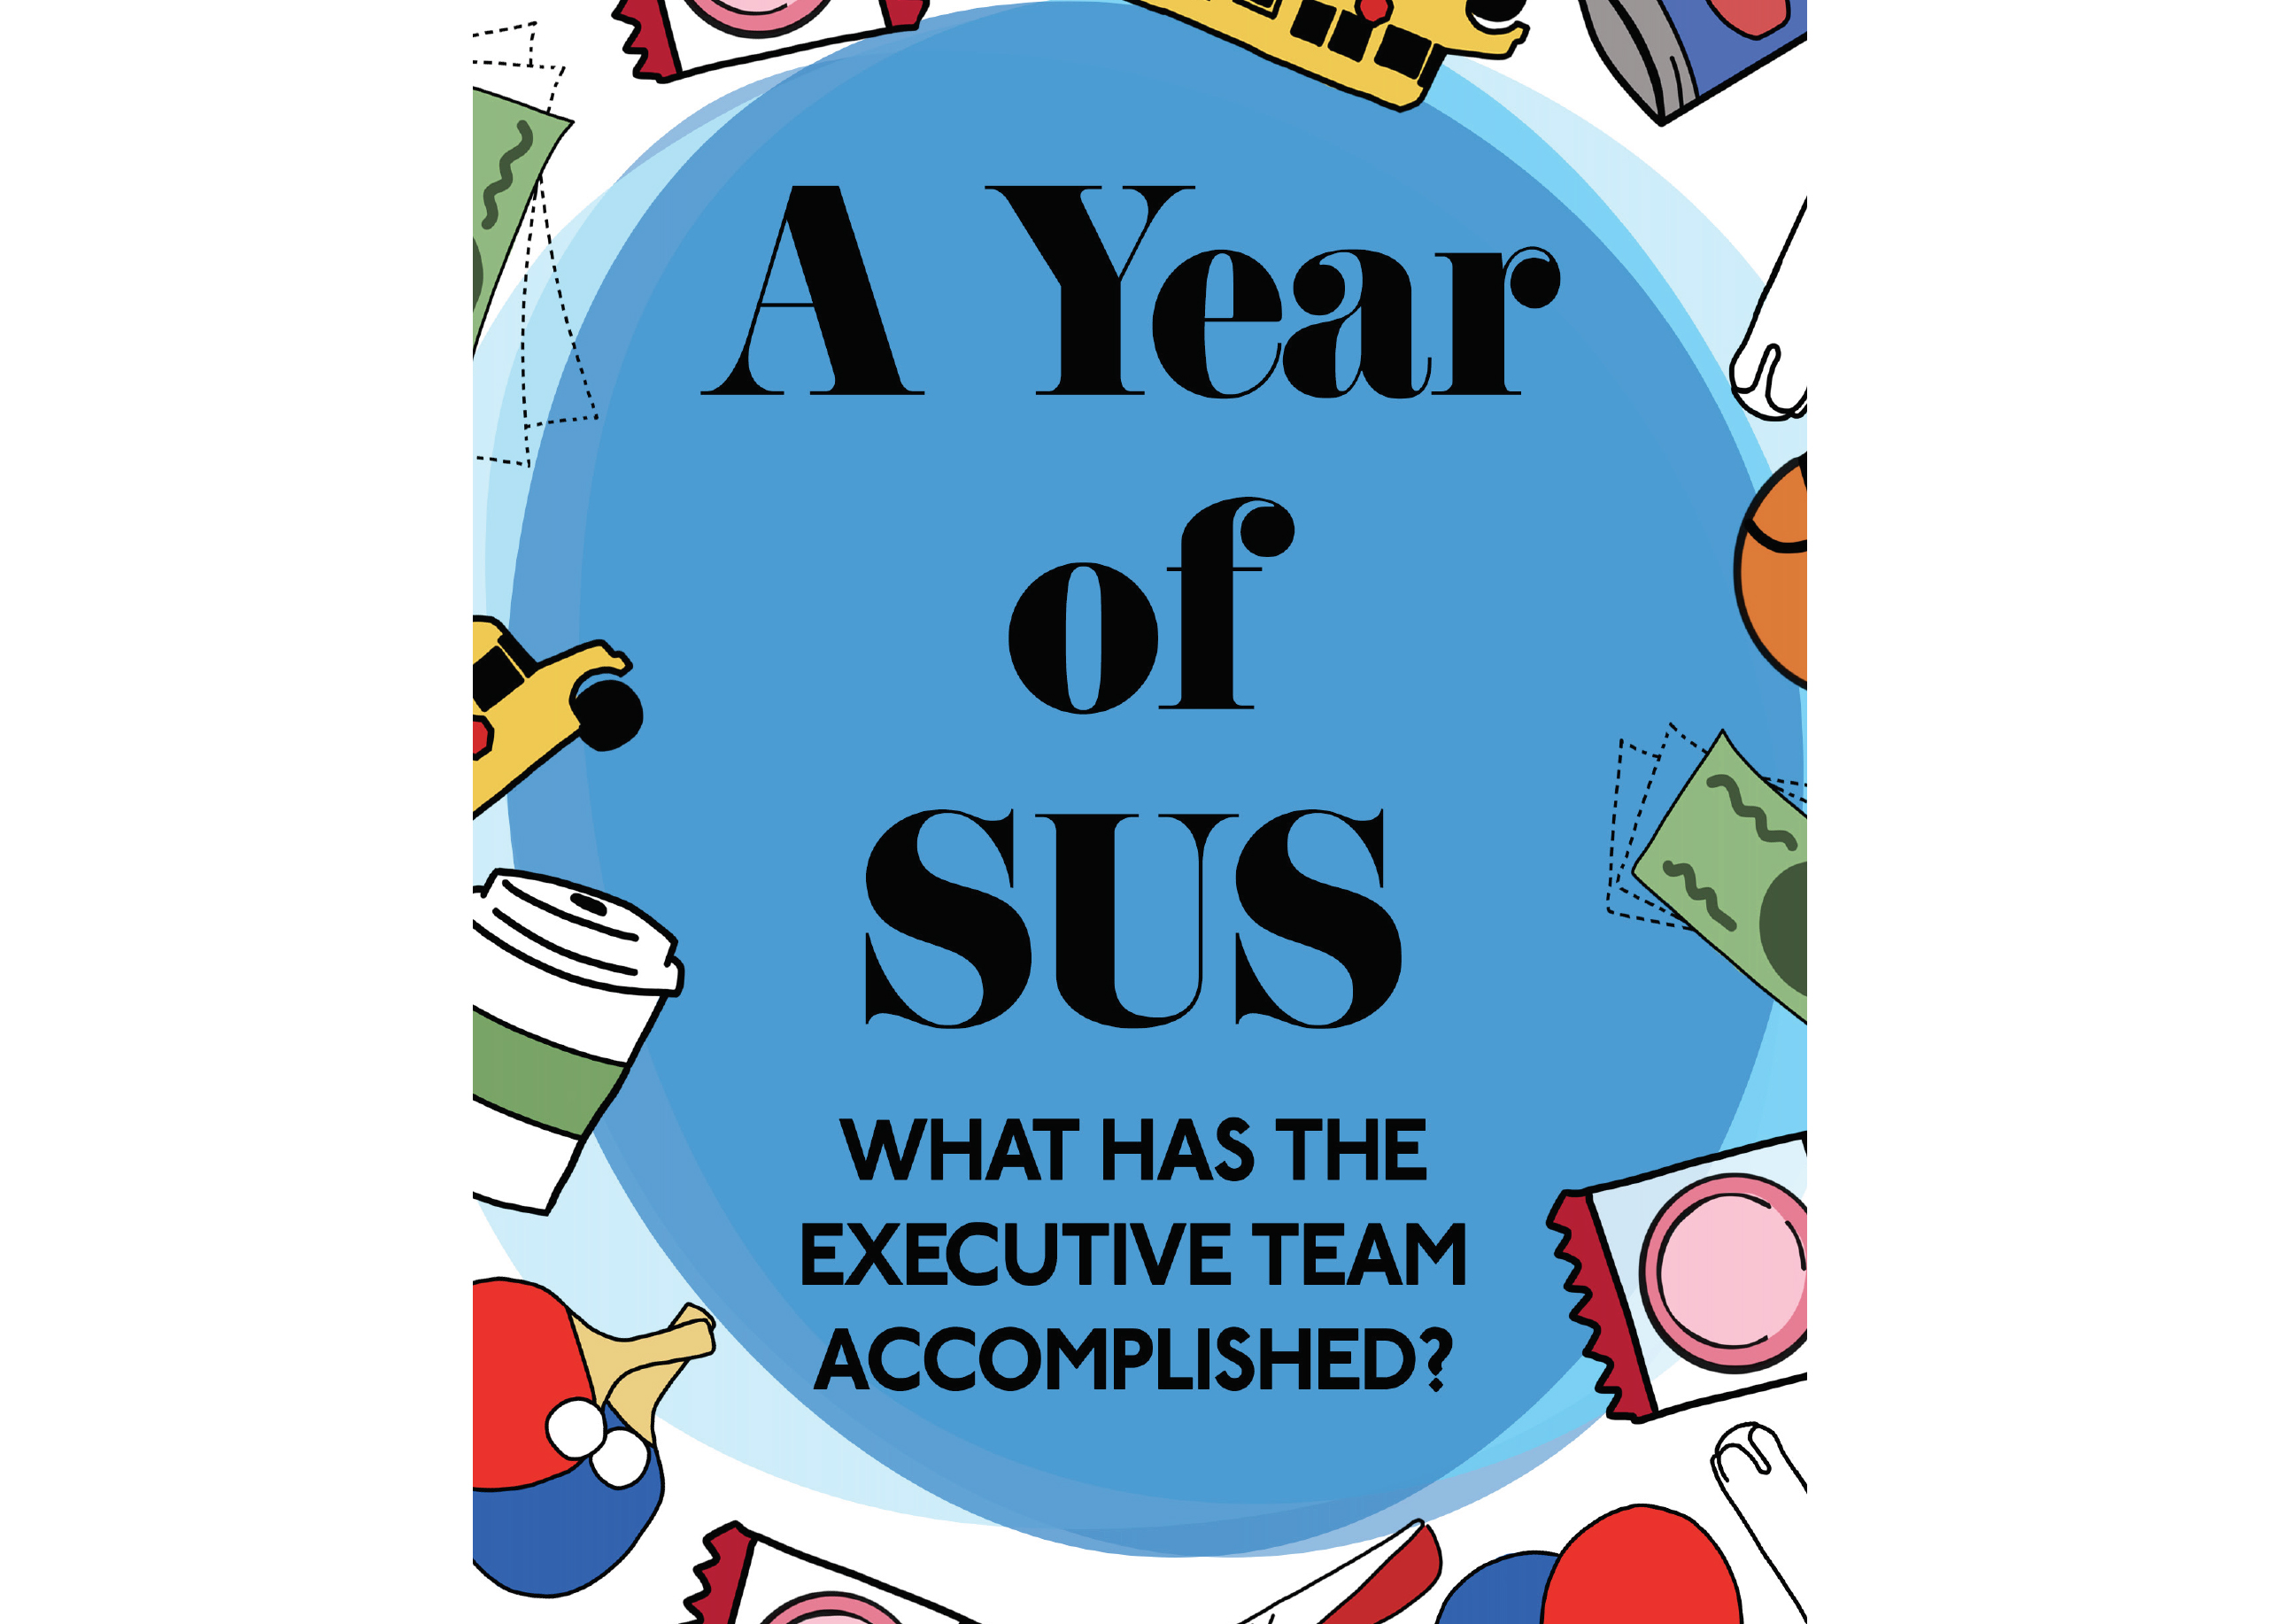 What have this year’s Student Union Society executives achieved?